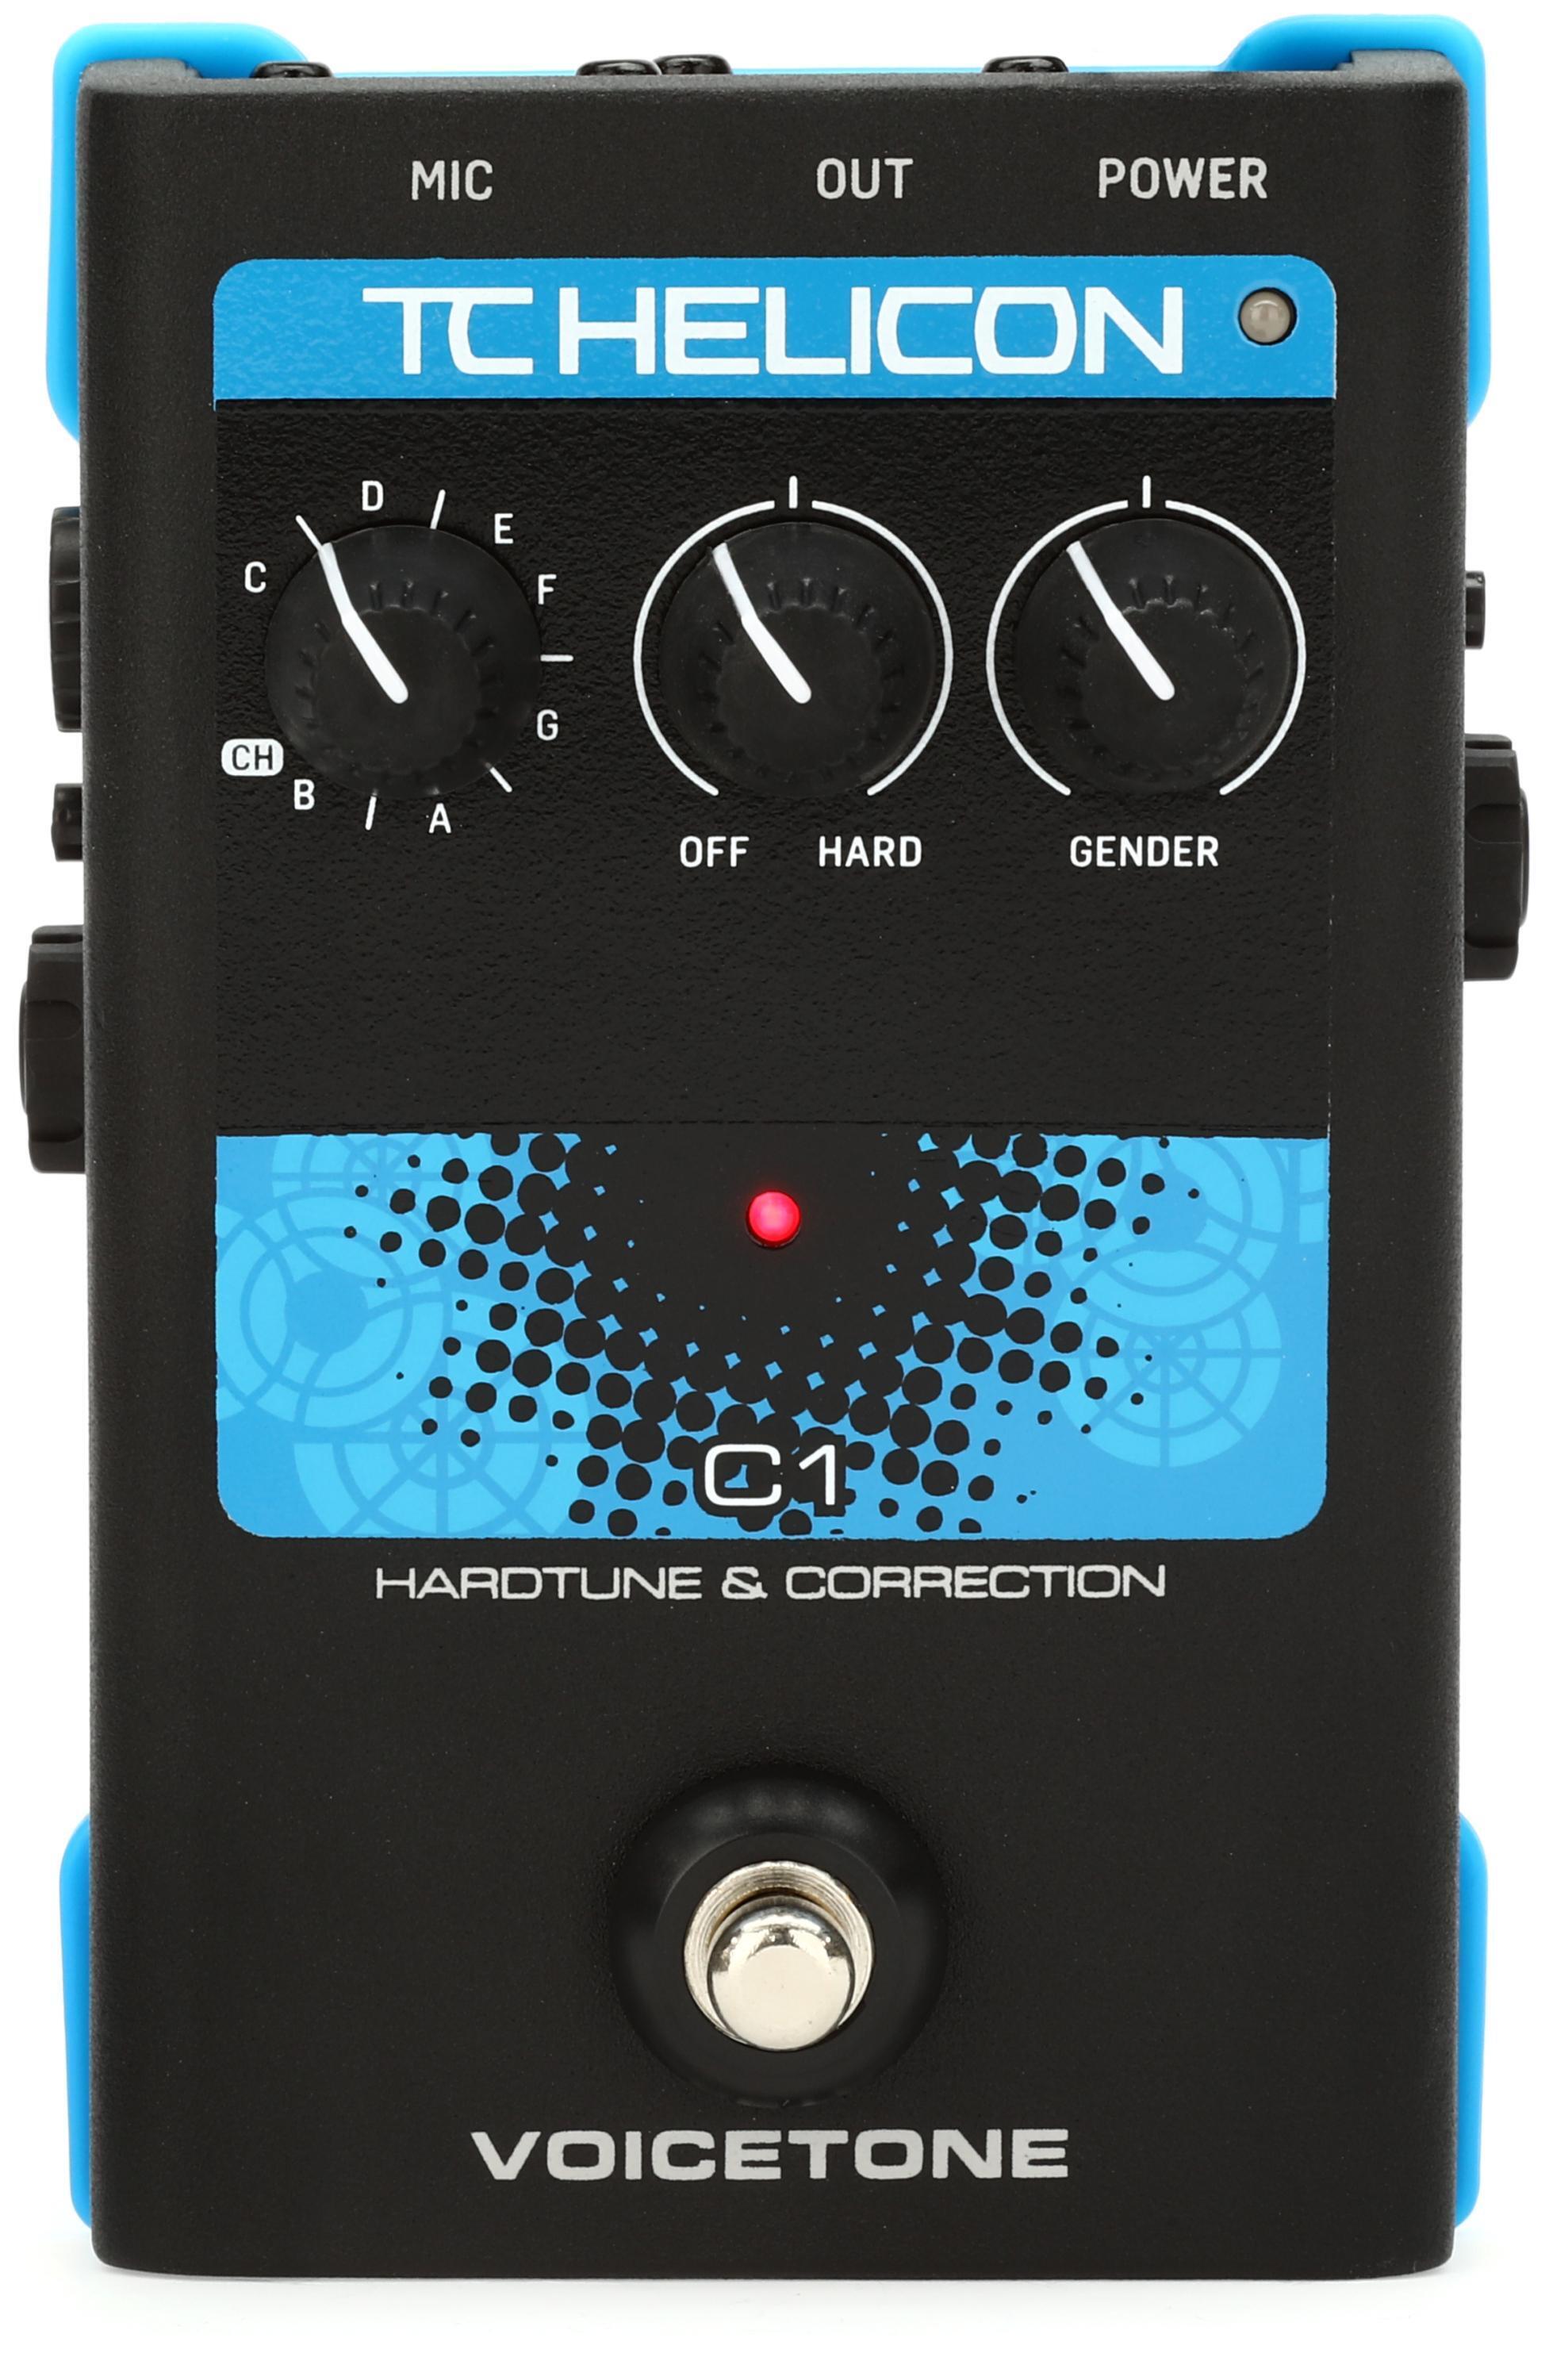 TC-Helicon VoiceTone E1 Vocal Echo and Delay Pedal | Sweetwater